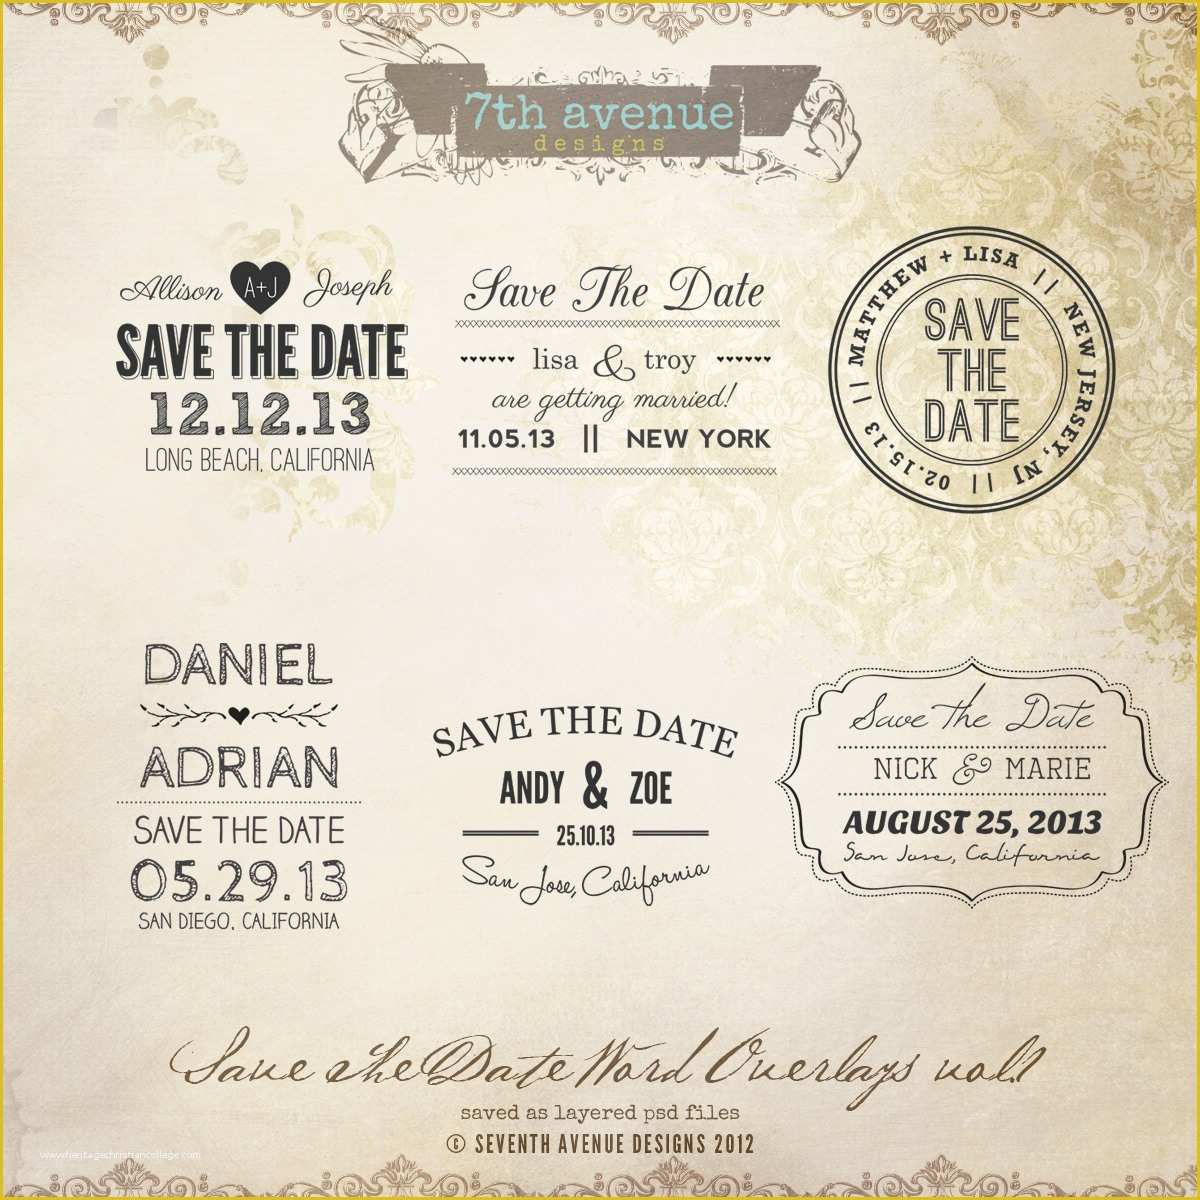 Free Save the Date Templates Word Of Senior Card Templates No 2 [senior2] $4 00 7thavenue